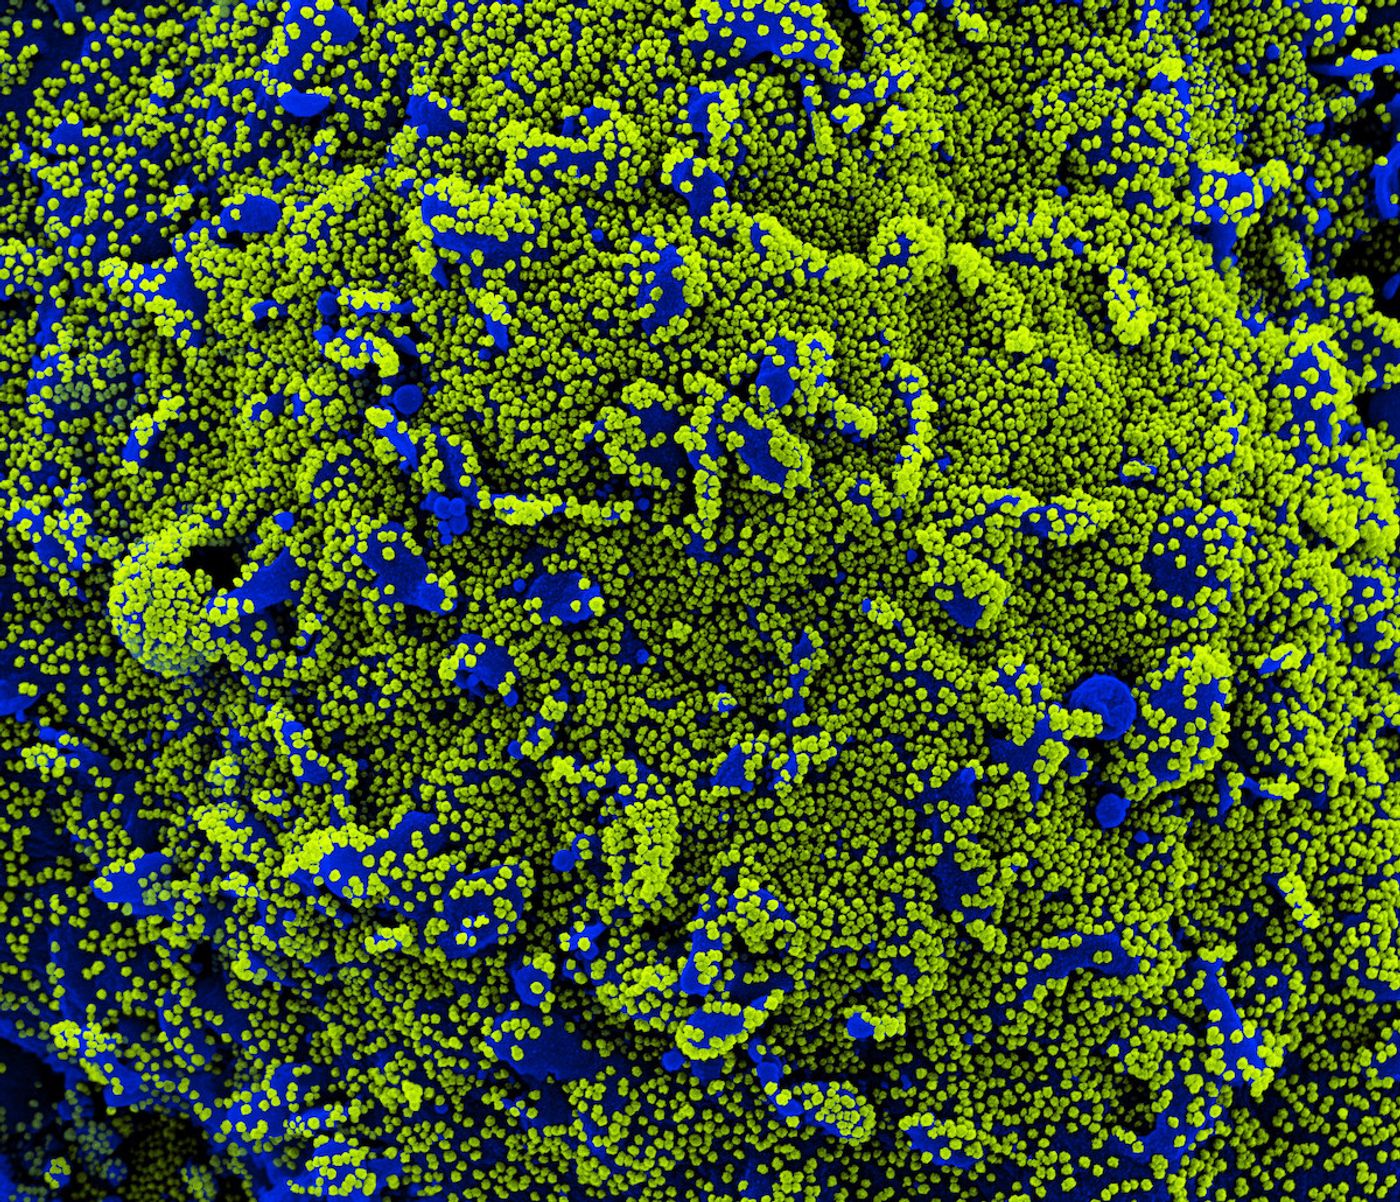 Colorized scanning electron micrograph of a cell (blue) heavily infected with SARS-CoV-2 virus particles (green), isolated from a patient sample. Image captured at the NIAID Integrated Research Facility (IRF) in Fort Detrick, Maryland. Credit: NIAID 